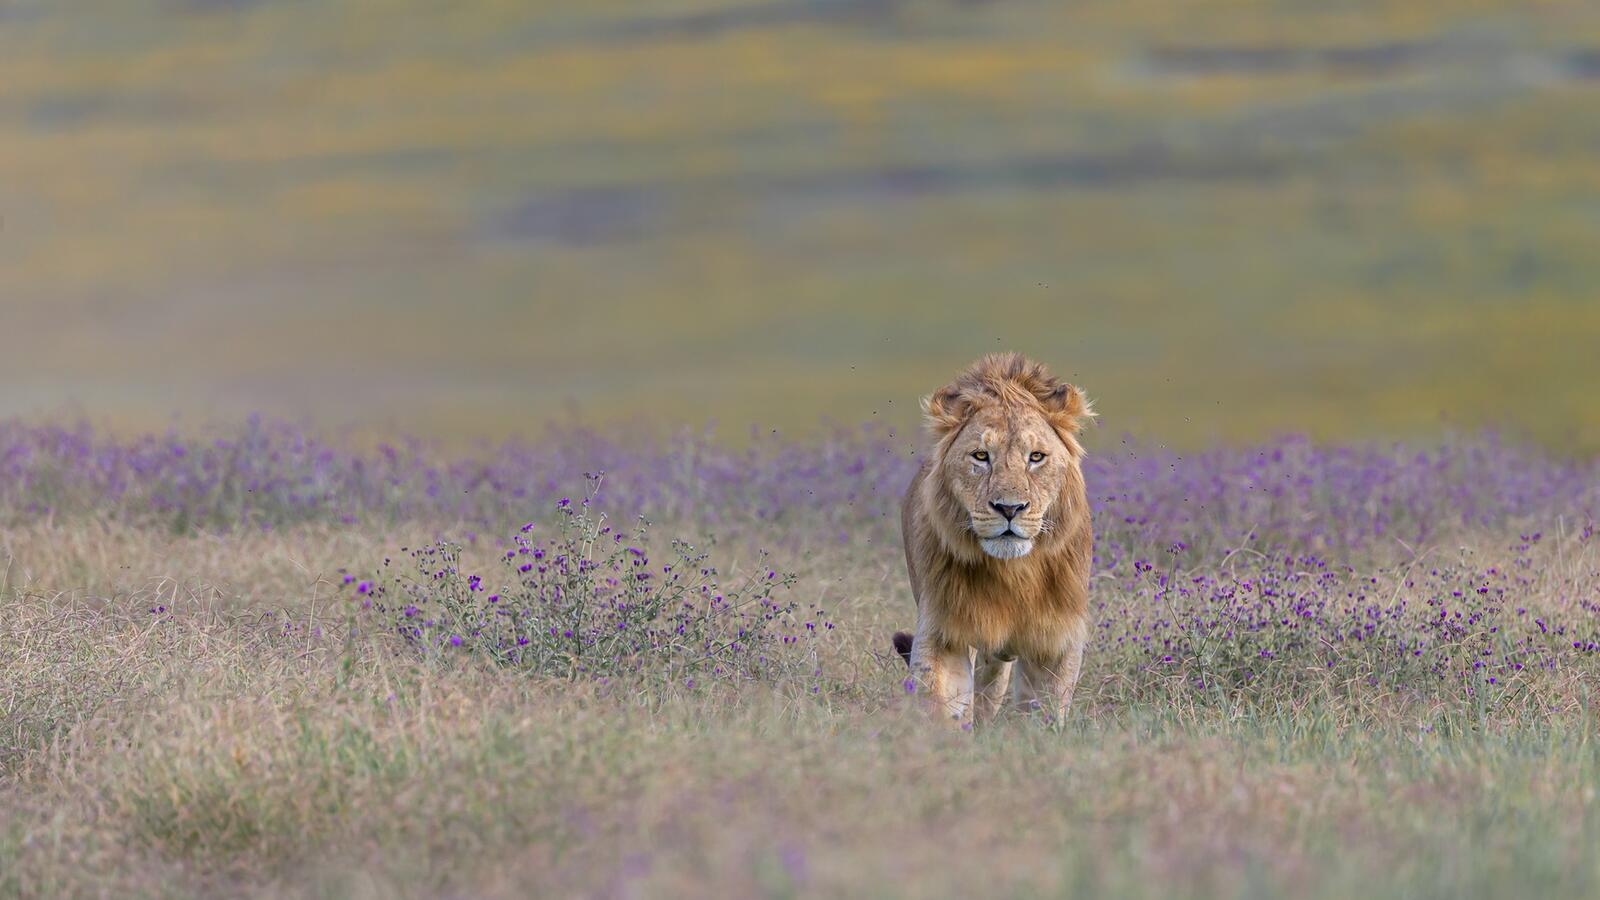 Free photo A lion in a large field with tall grass and flowers